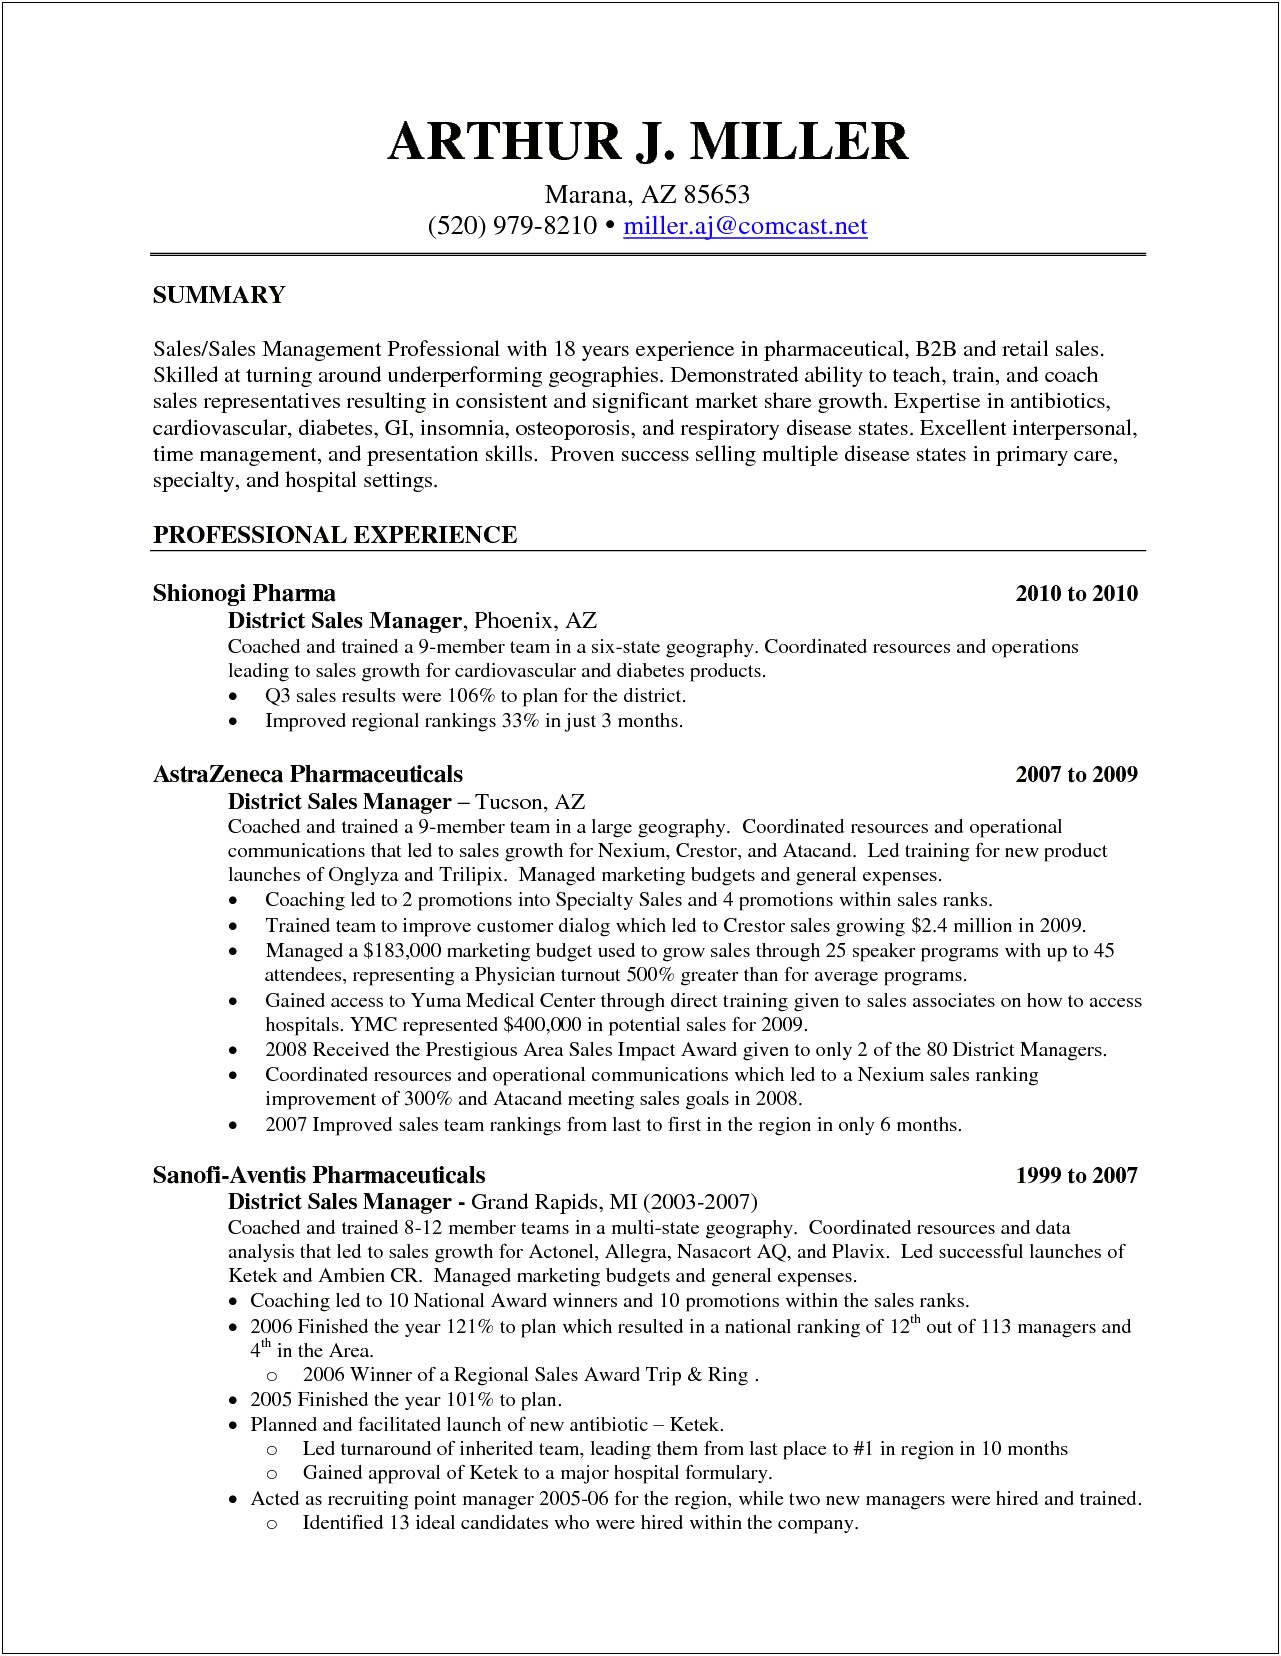 Resume For Regional Sales Manager In Pharma